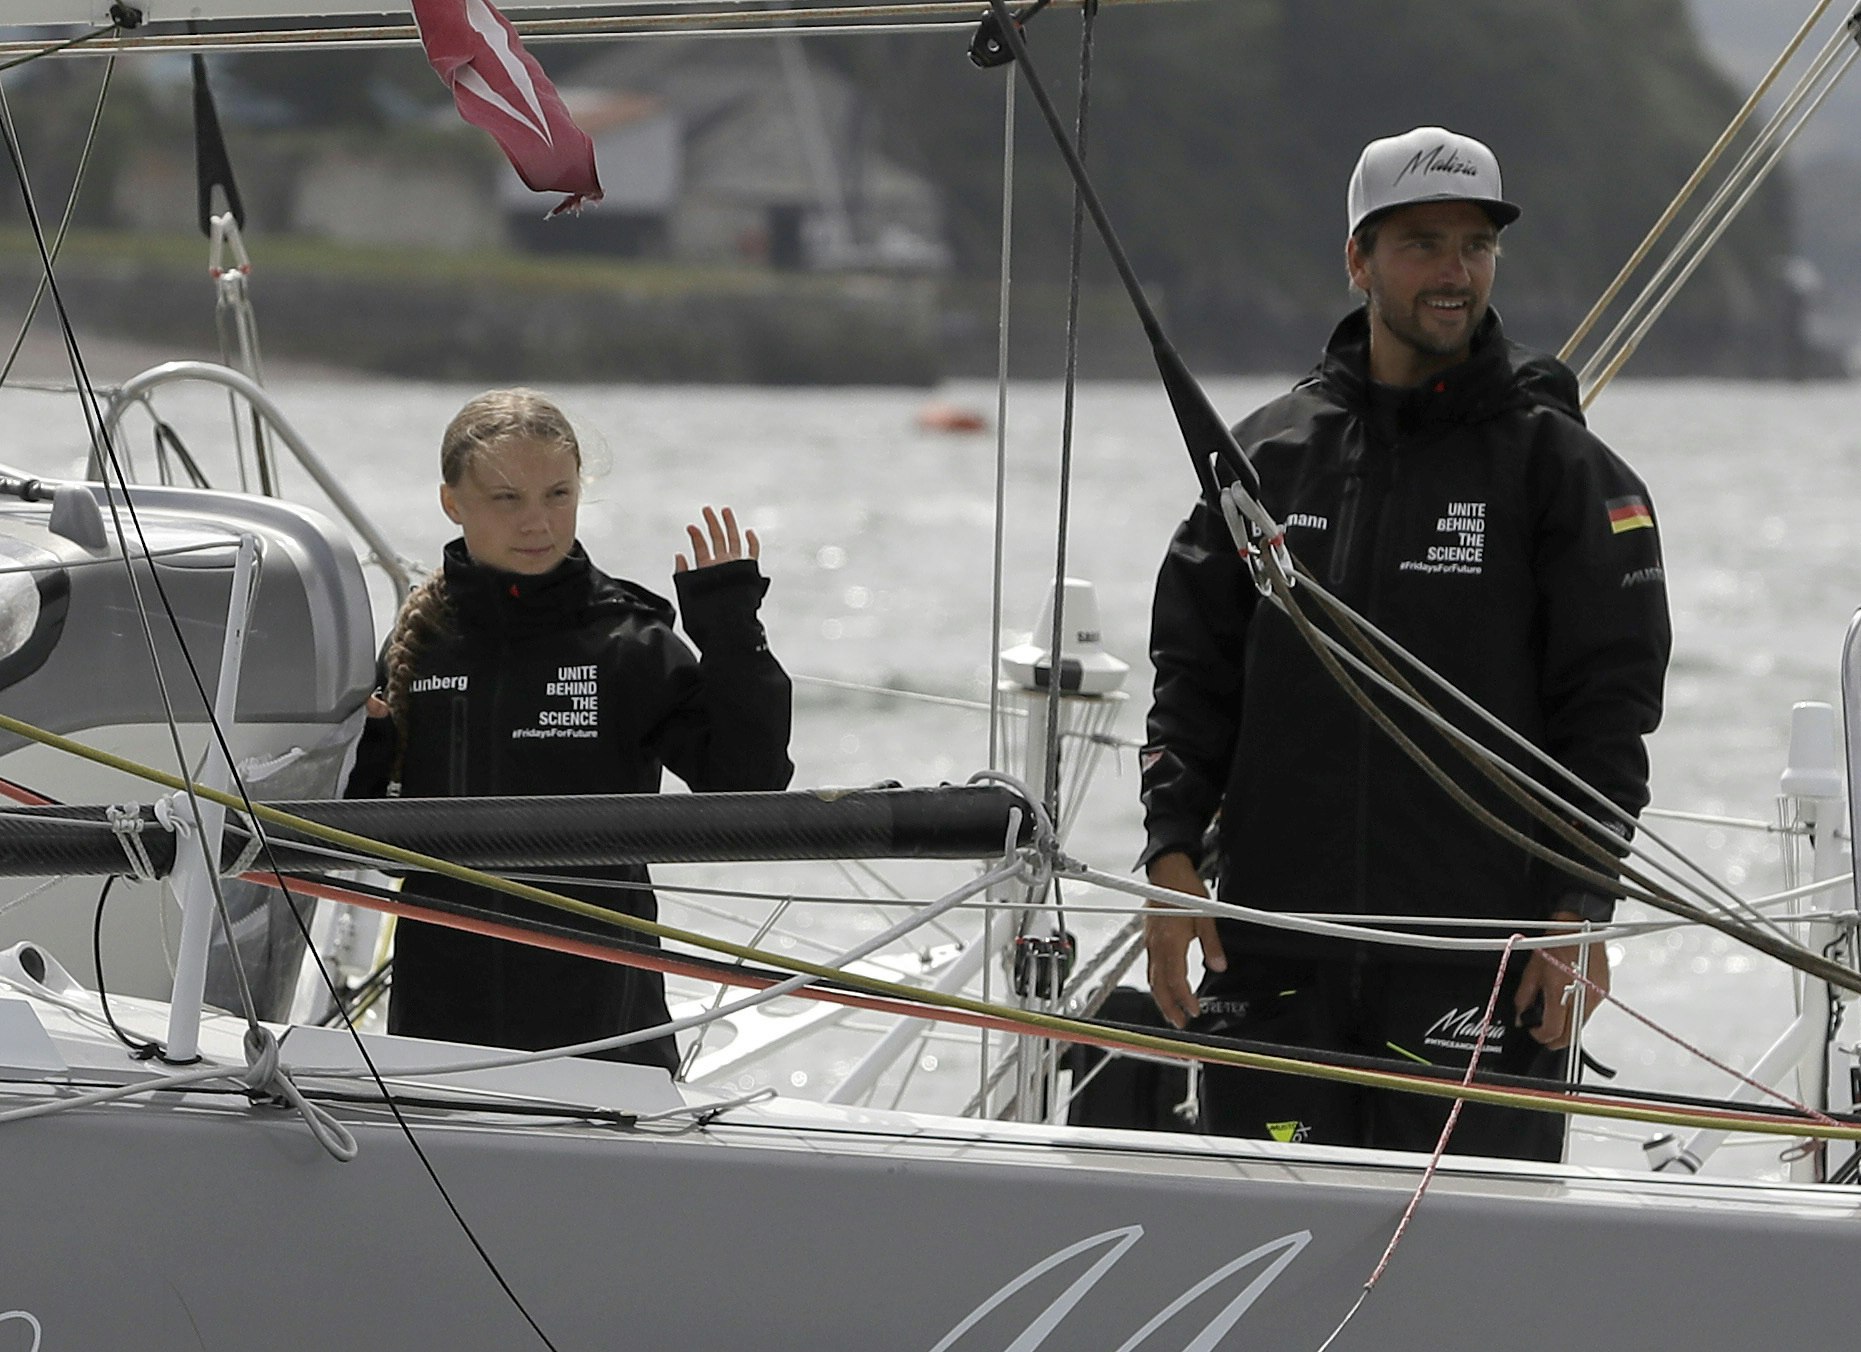 Climate activist Greta Thunberg stands on a solar powered sailboat ahead of her voyage to the 2019 United Nations Climate Action Summit. She wears a black windbreaker with the words United Behind the Science printed in white. She stands next to a man wearing a similar jacket, with the German flag on the left sleeve and a white ball cap on his head. 